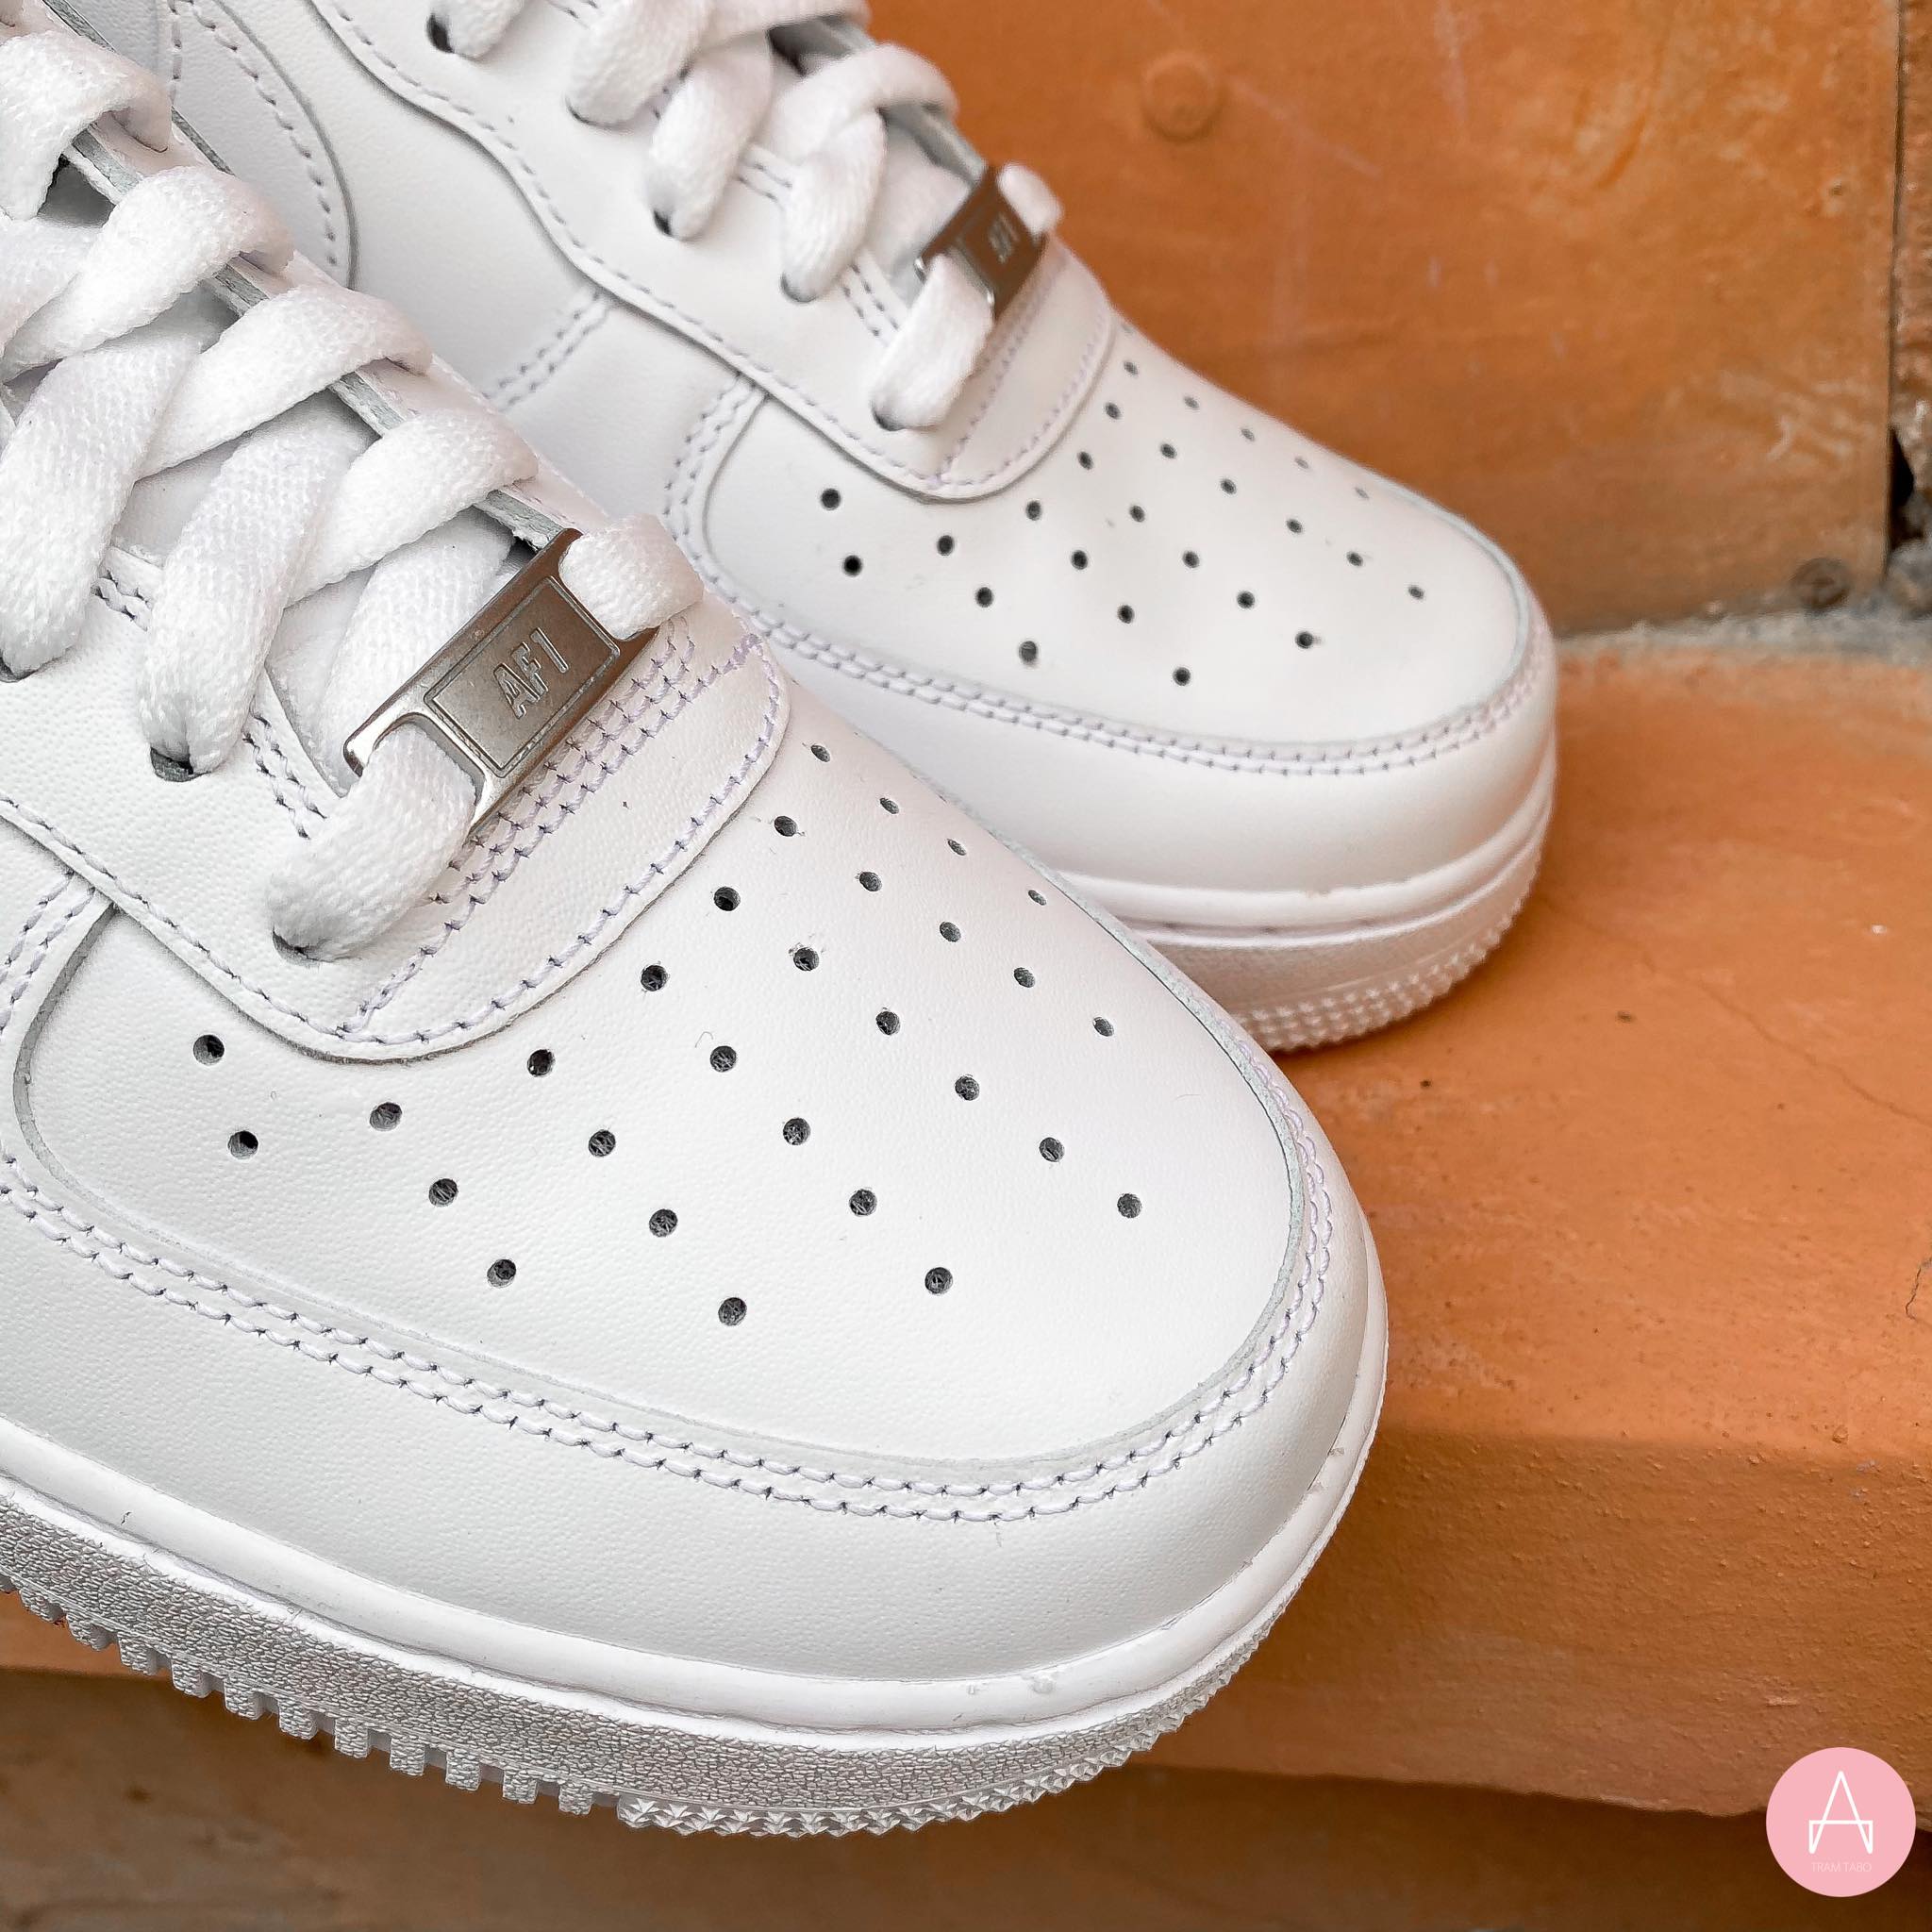 [CW2288-111] M NIKE AIR FORCE 1 LOW ALL WHITE '07